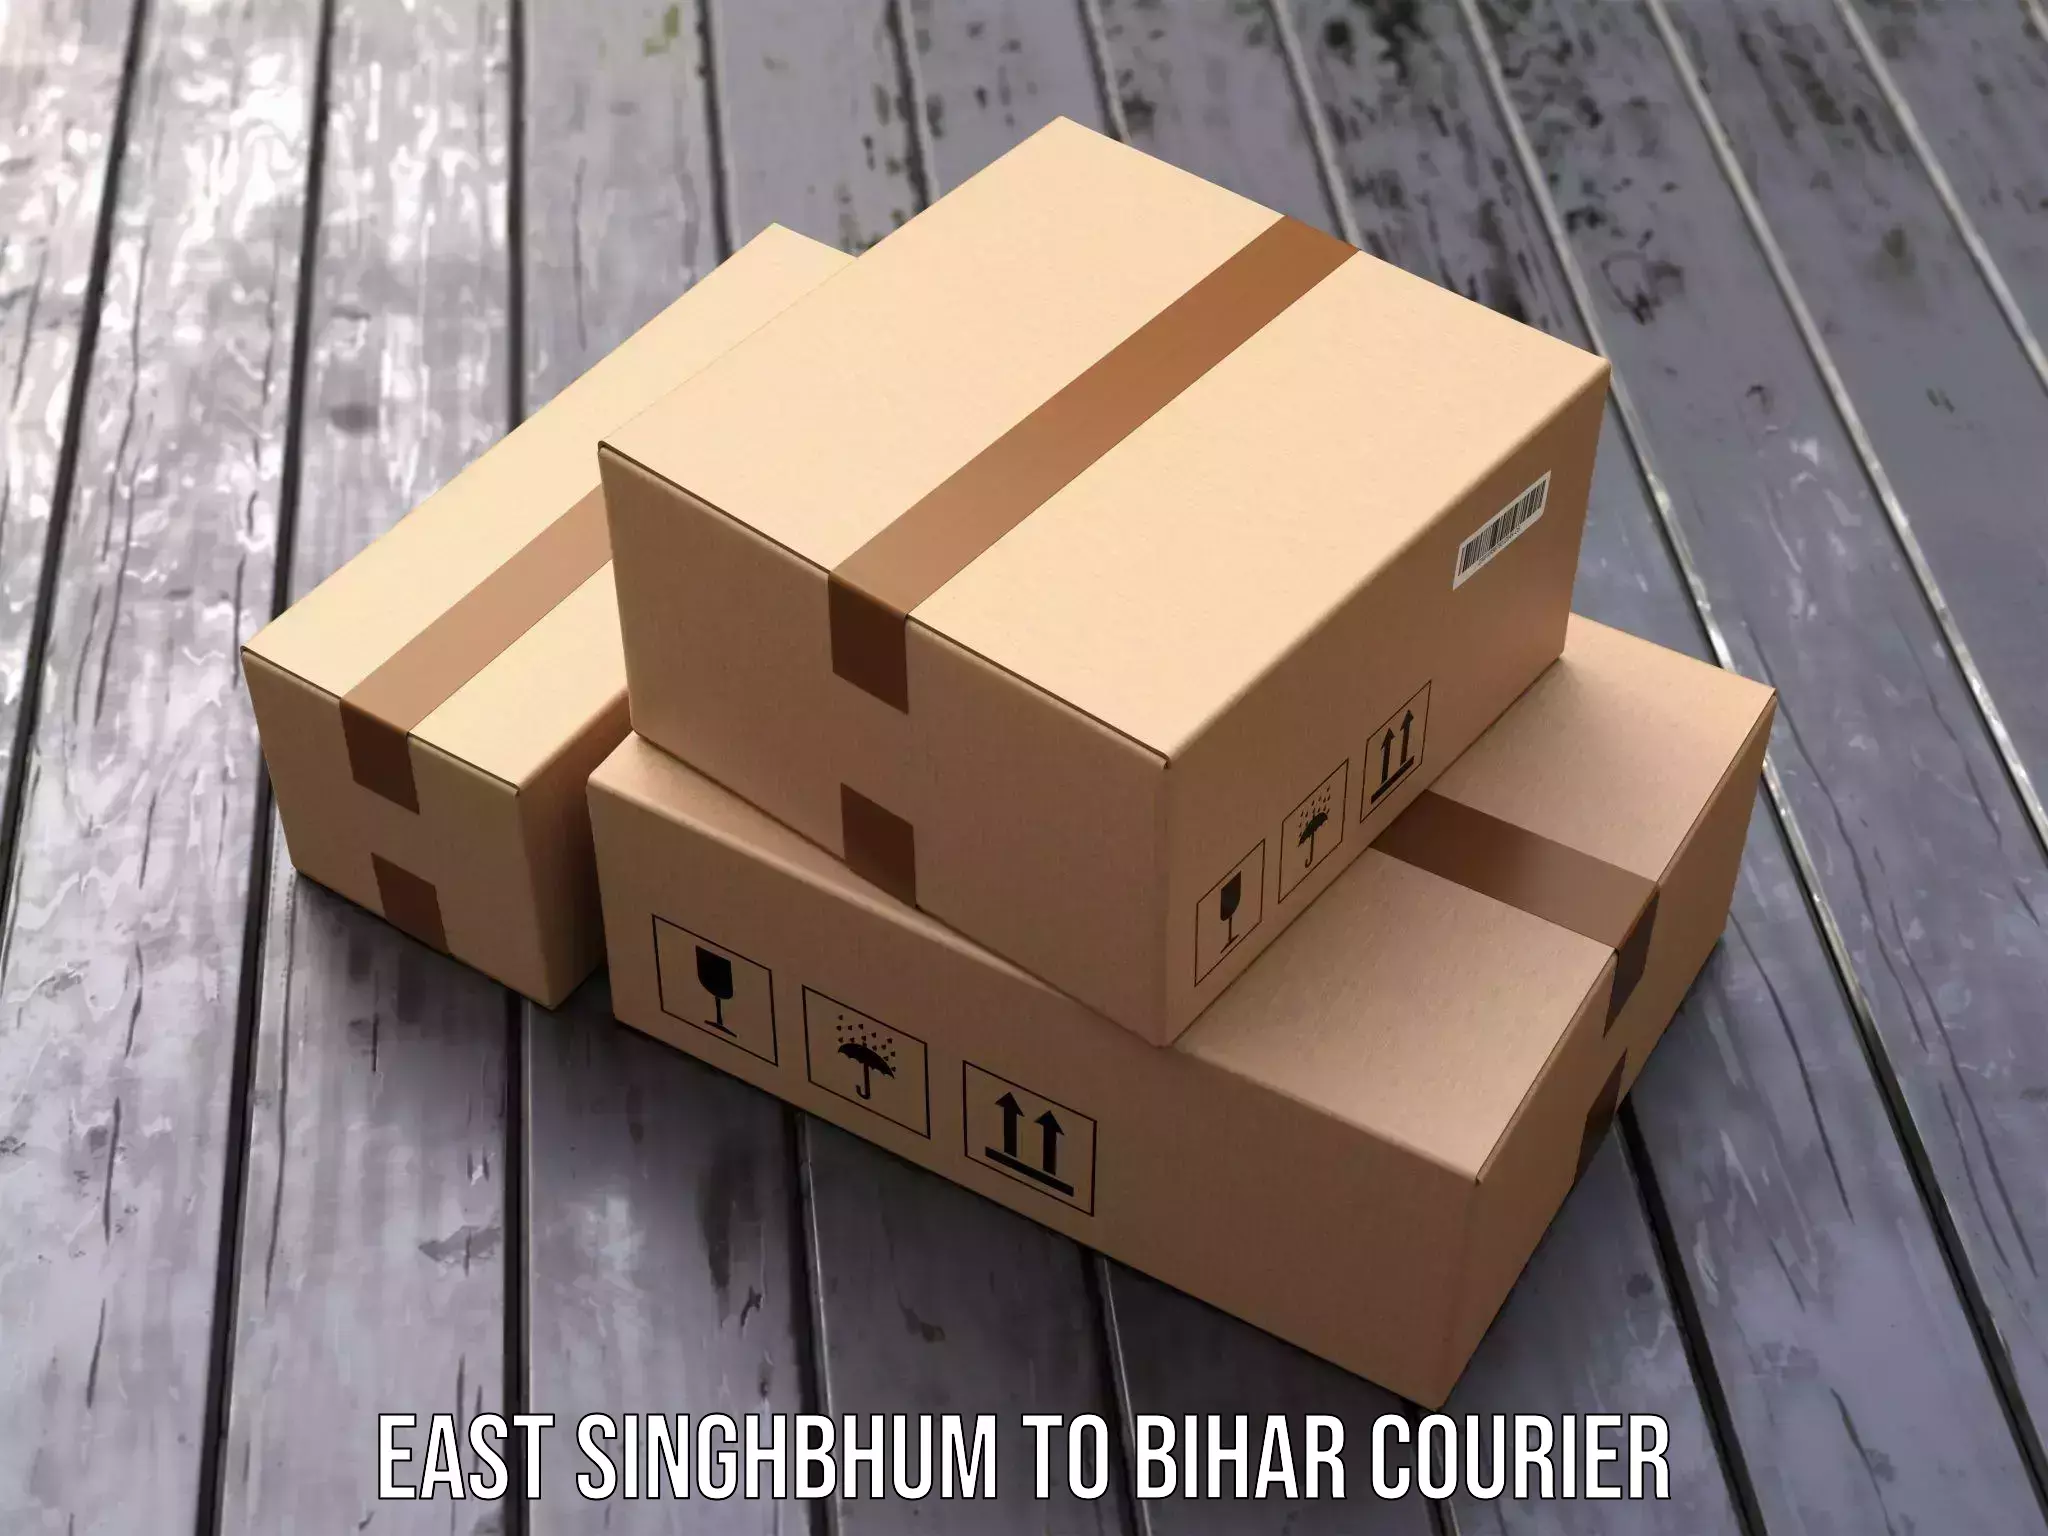 Overnight delivery services East Singhbhum to Dinara